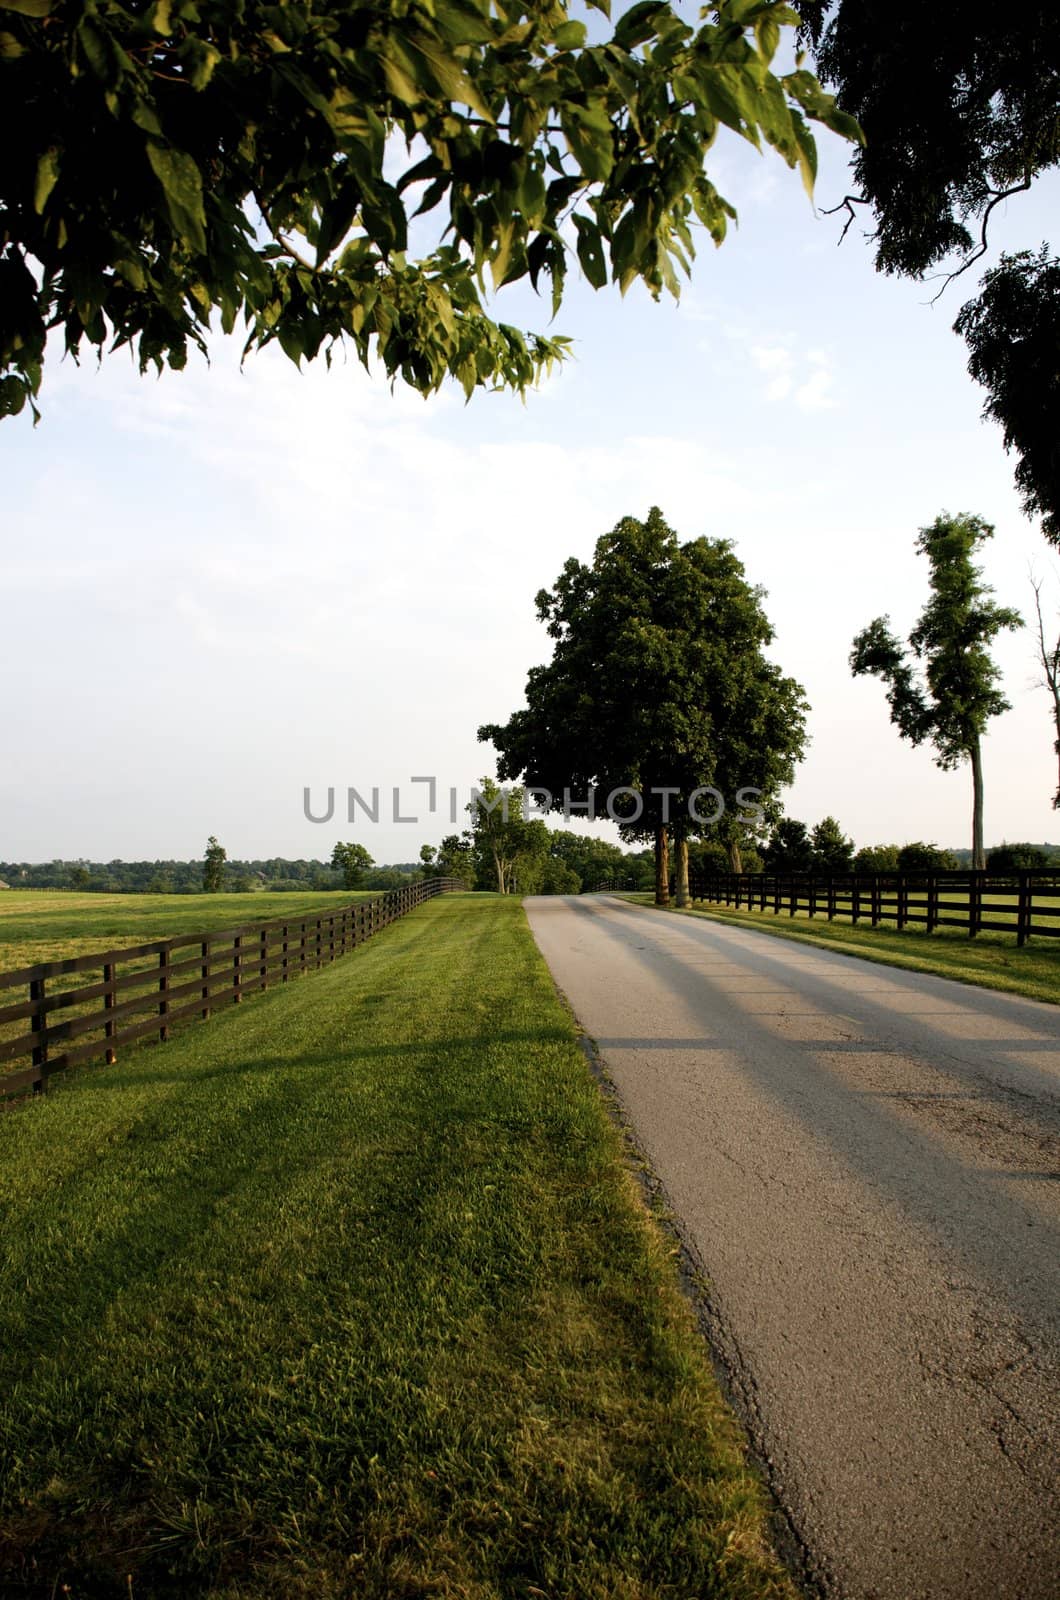 Kentucky Country Road